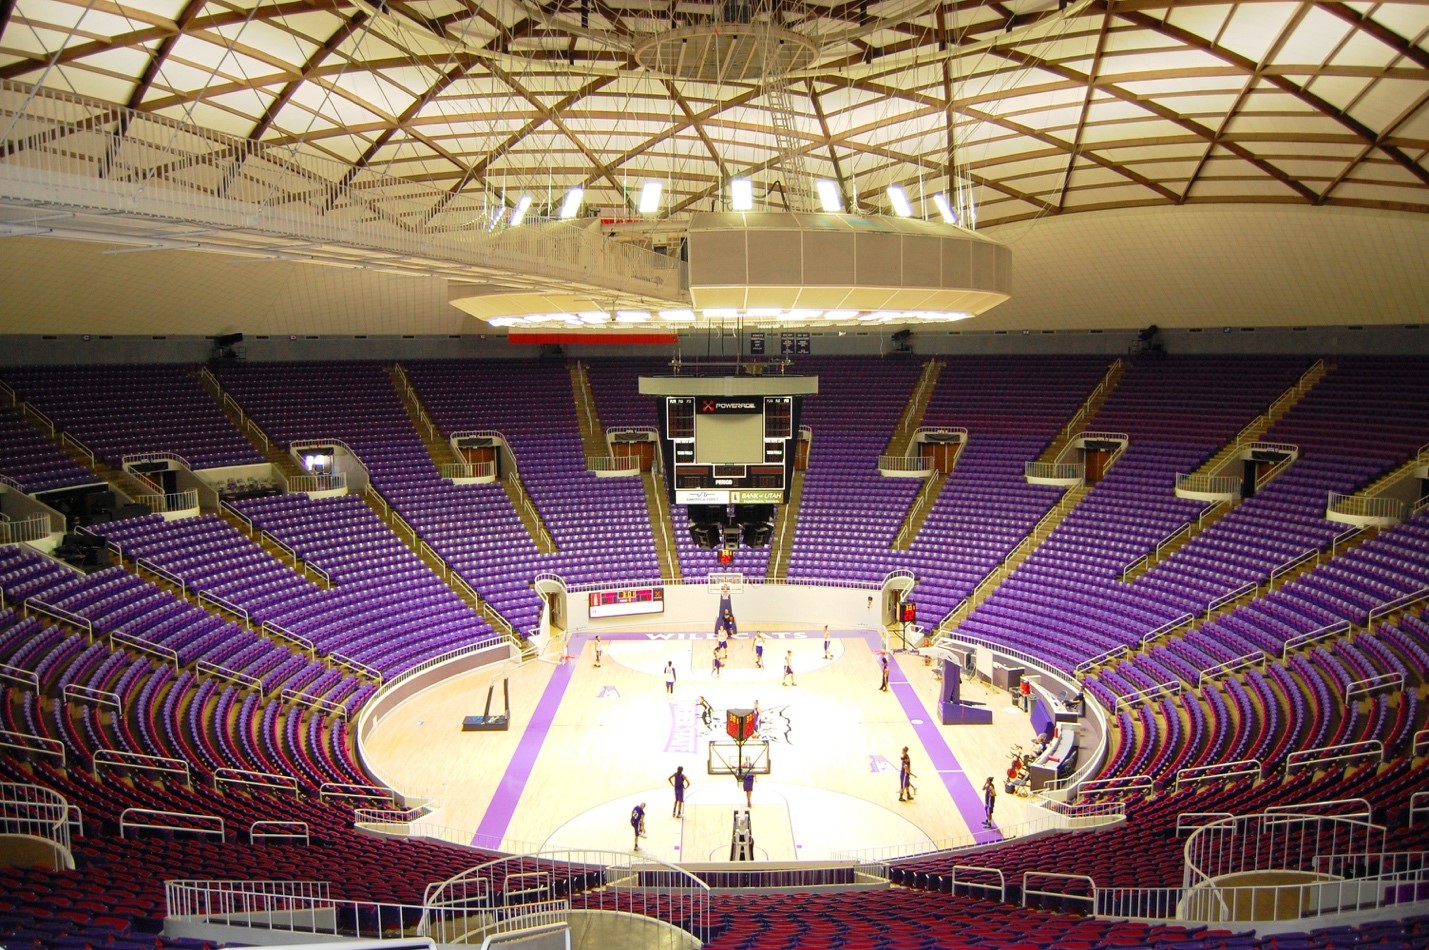 Replacing lighting with energy-efficient bulbs was one of the university’s first sustainability initiatives; cost savings on electricity bills were then rolled into more sustainability projects. Here, LED lights illuminate the university’s Dee Events Center arena. (Photo courtesy of Weber State University)